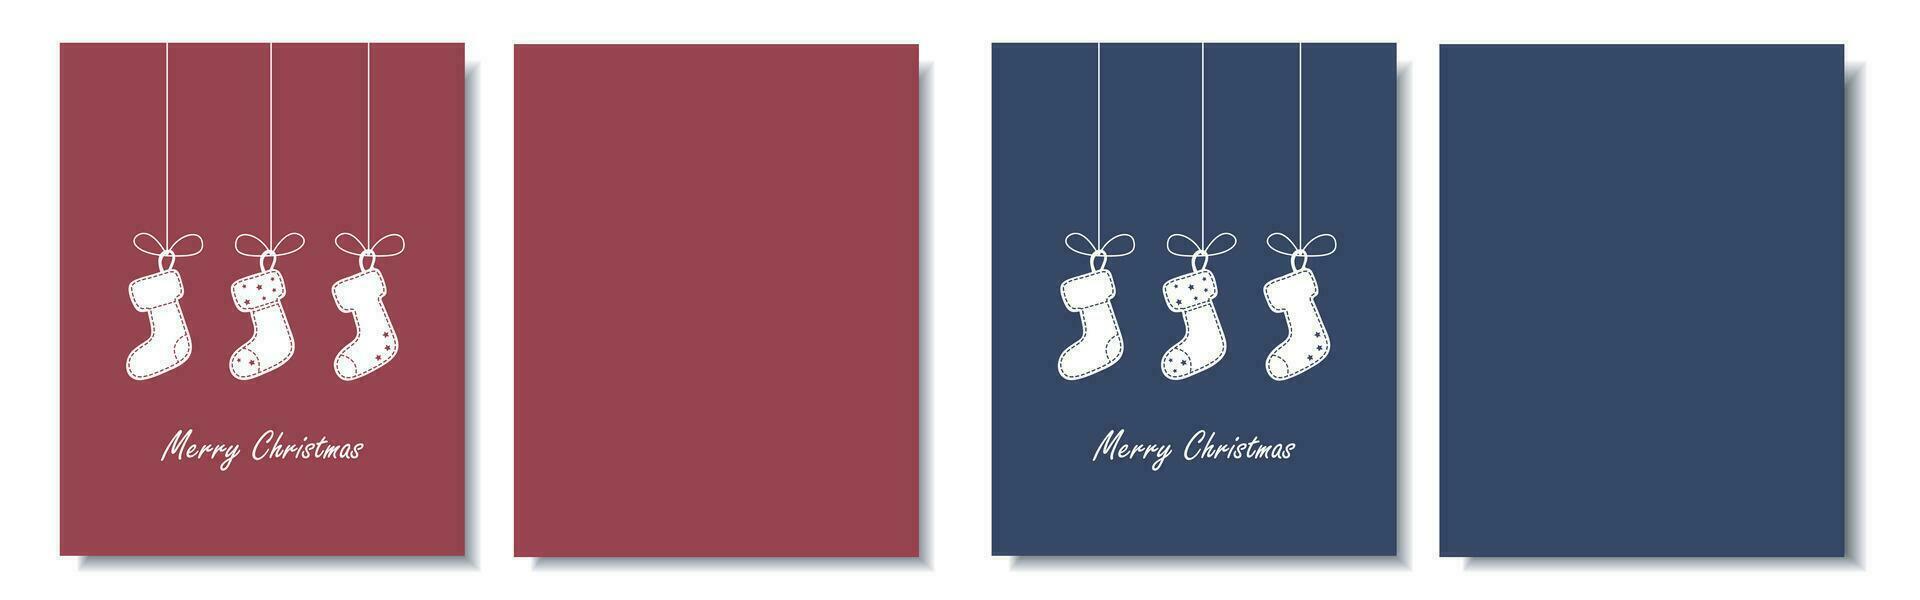 Set of 2 universal postcards with a red and blue background. Christmas card with hanging socks on bows. Universal Christmas banner template, background with space for text. vector